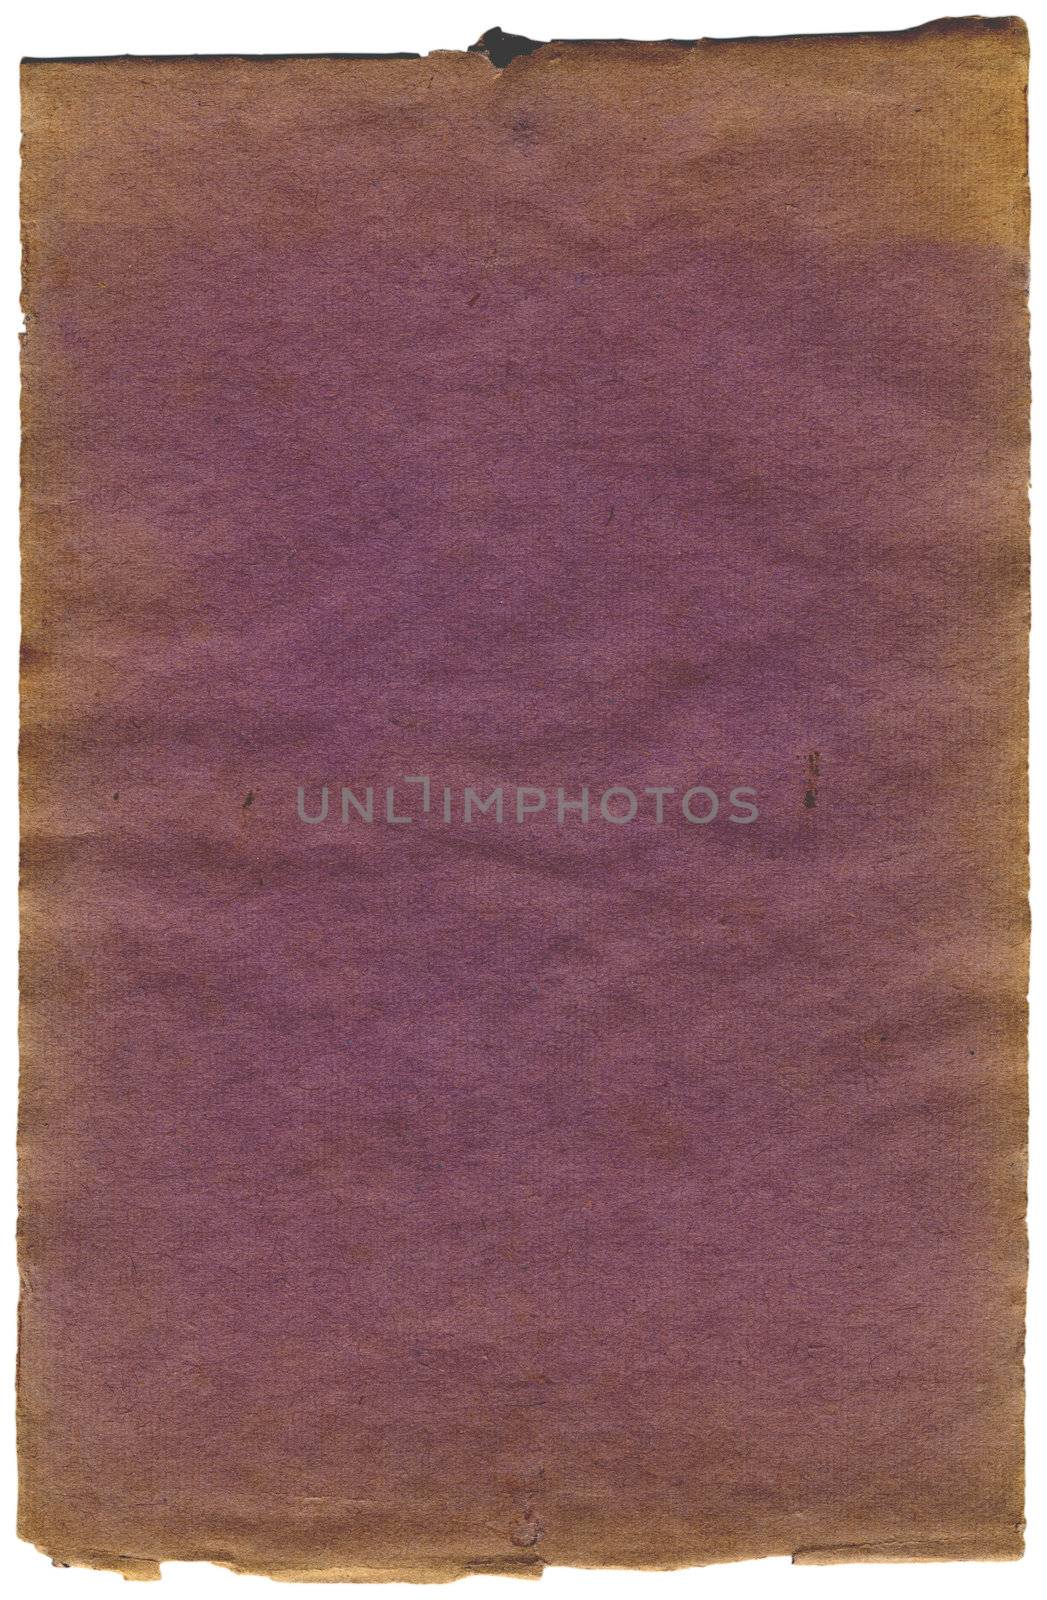 grungy strongly textured soft tissue paper